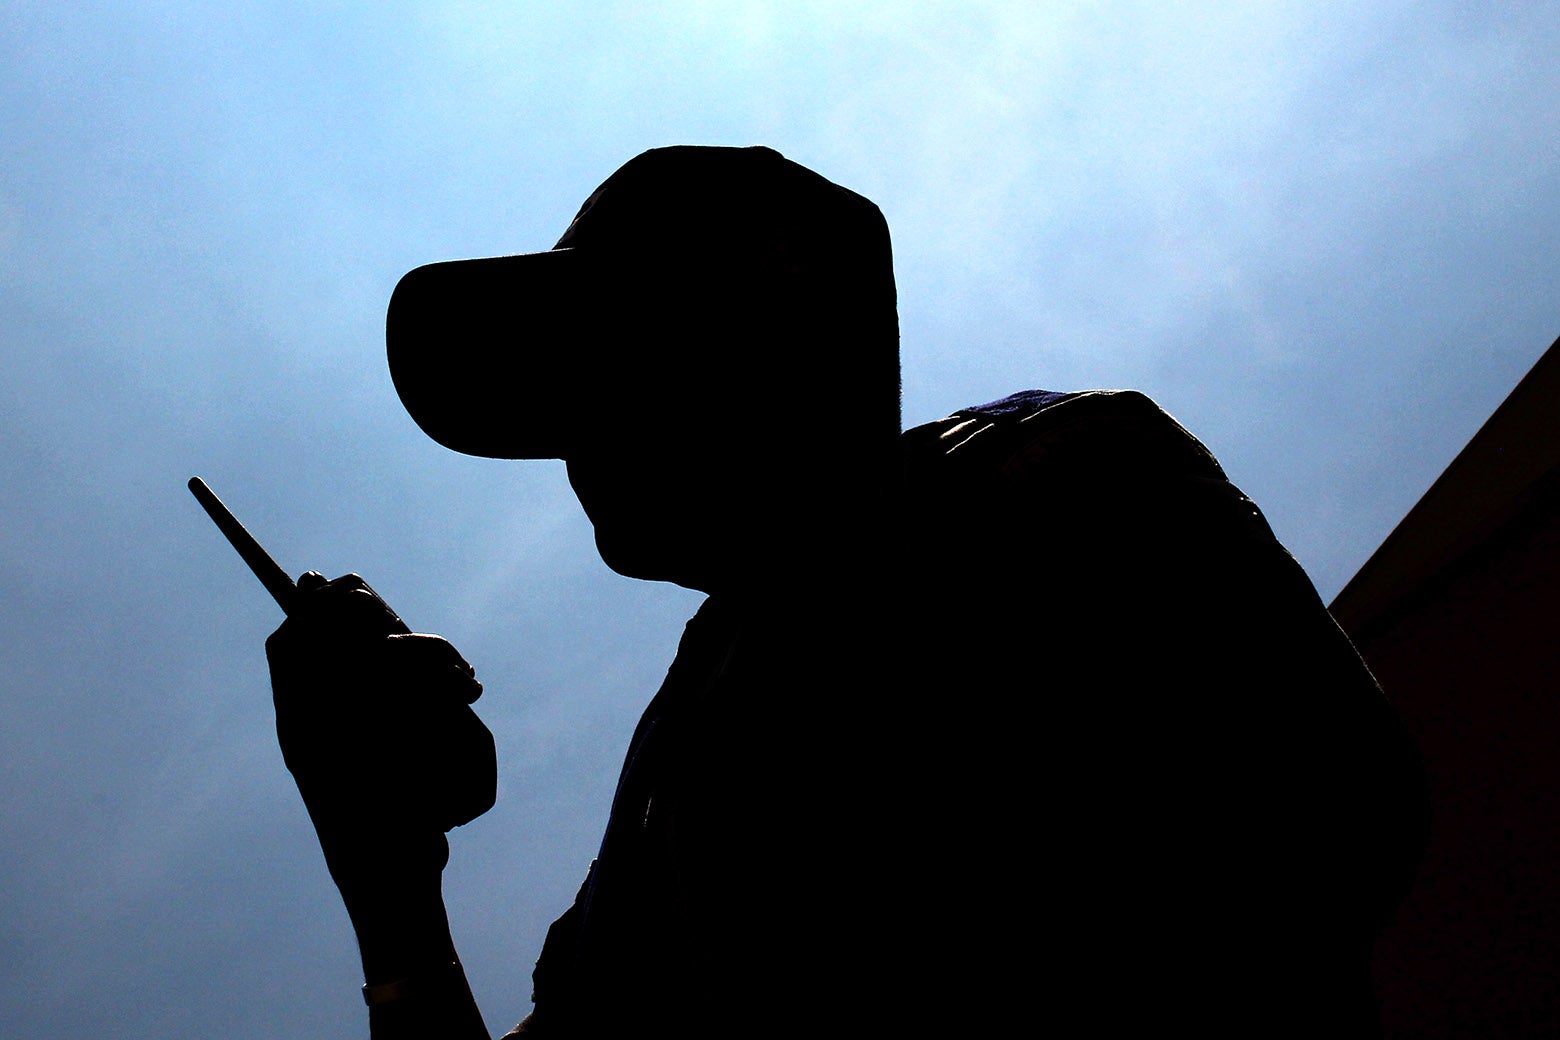 A silhouette of a man in a cap holding a walkie-talkie